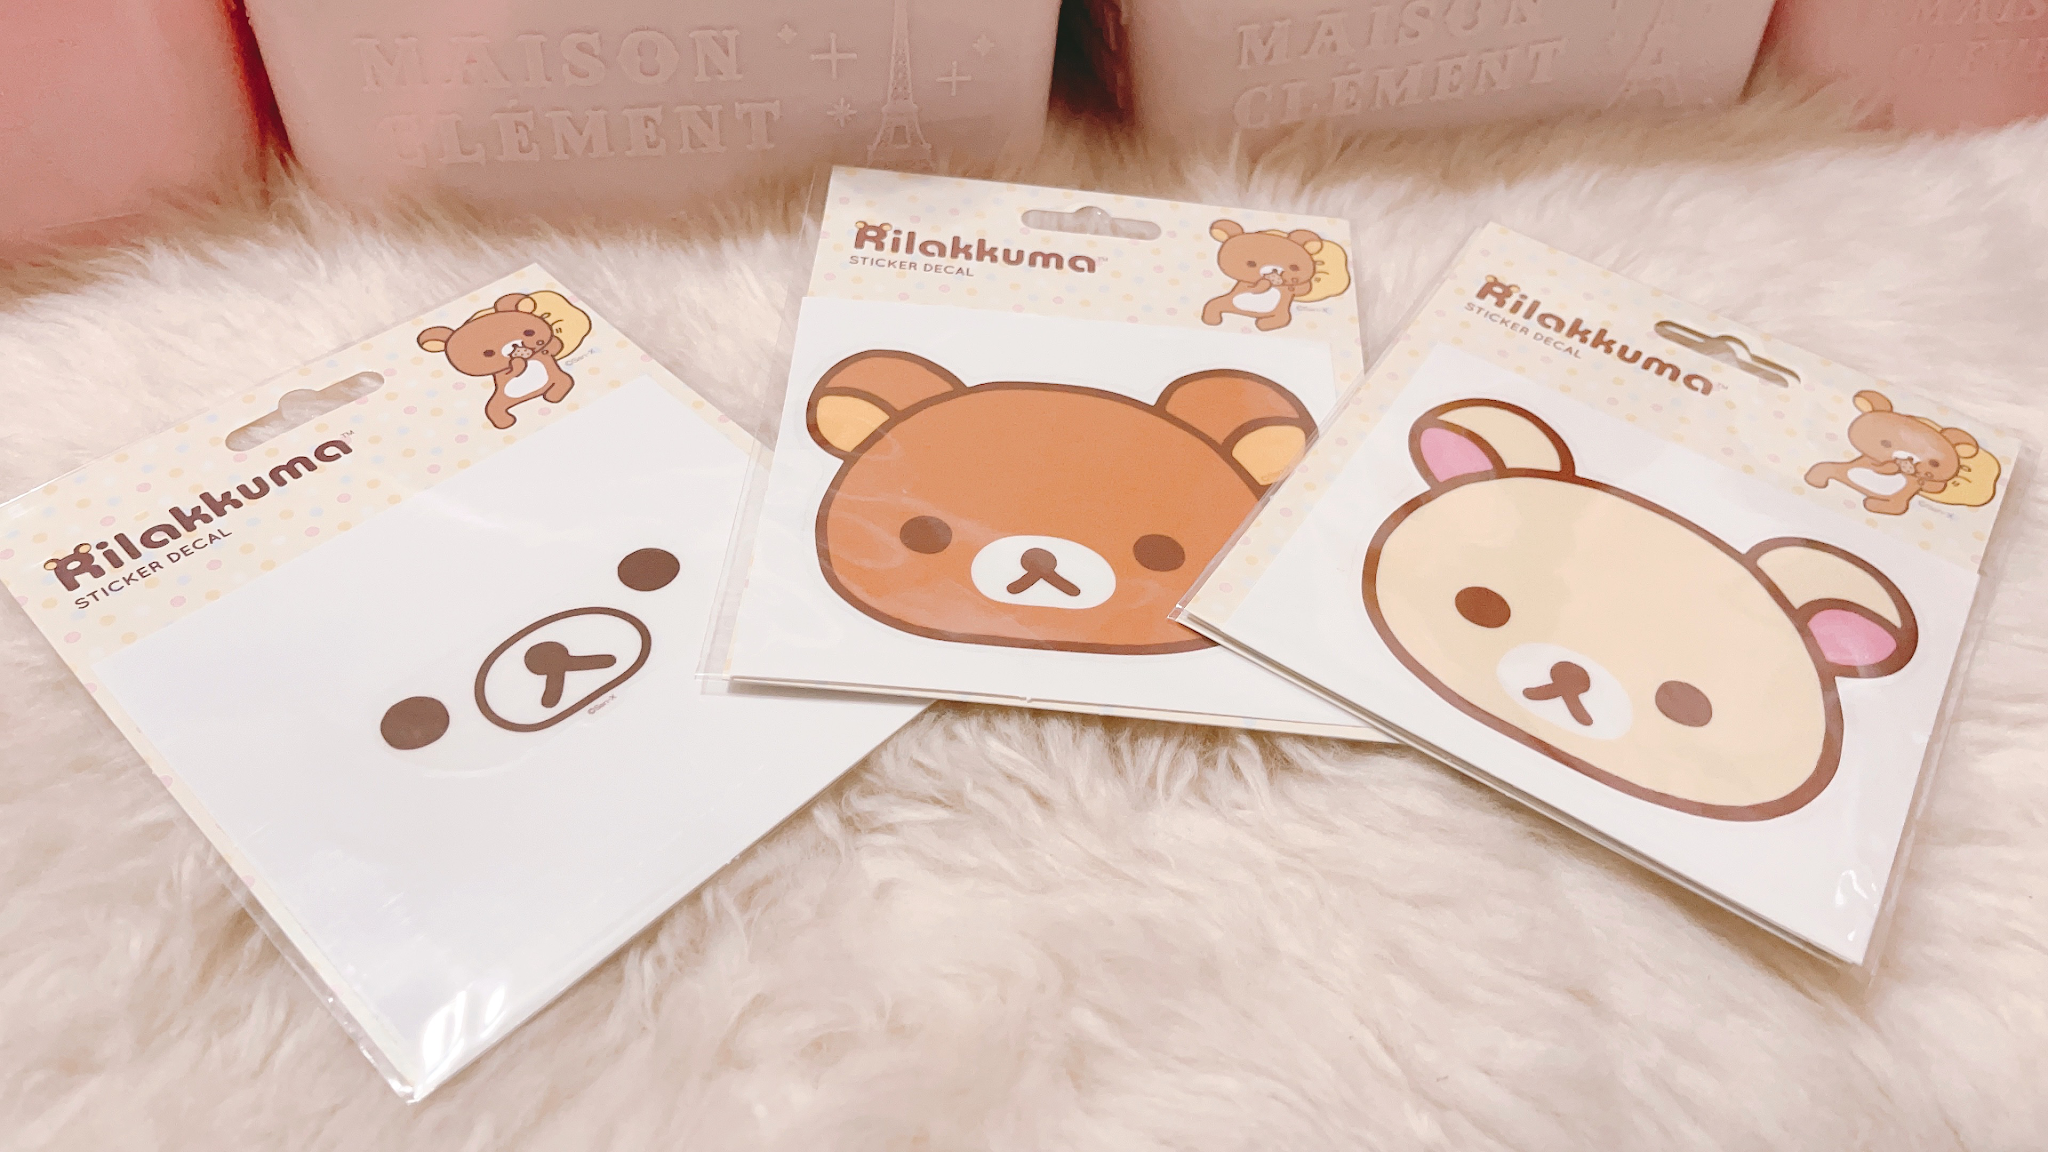 Daiso Sticker Haul!  cute stickers from daiso 🥰 planning on